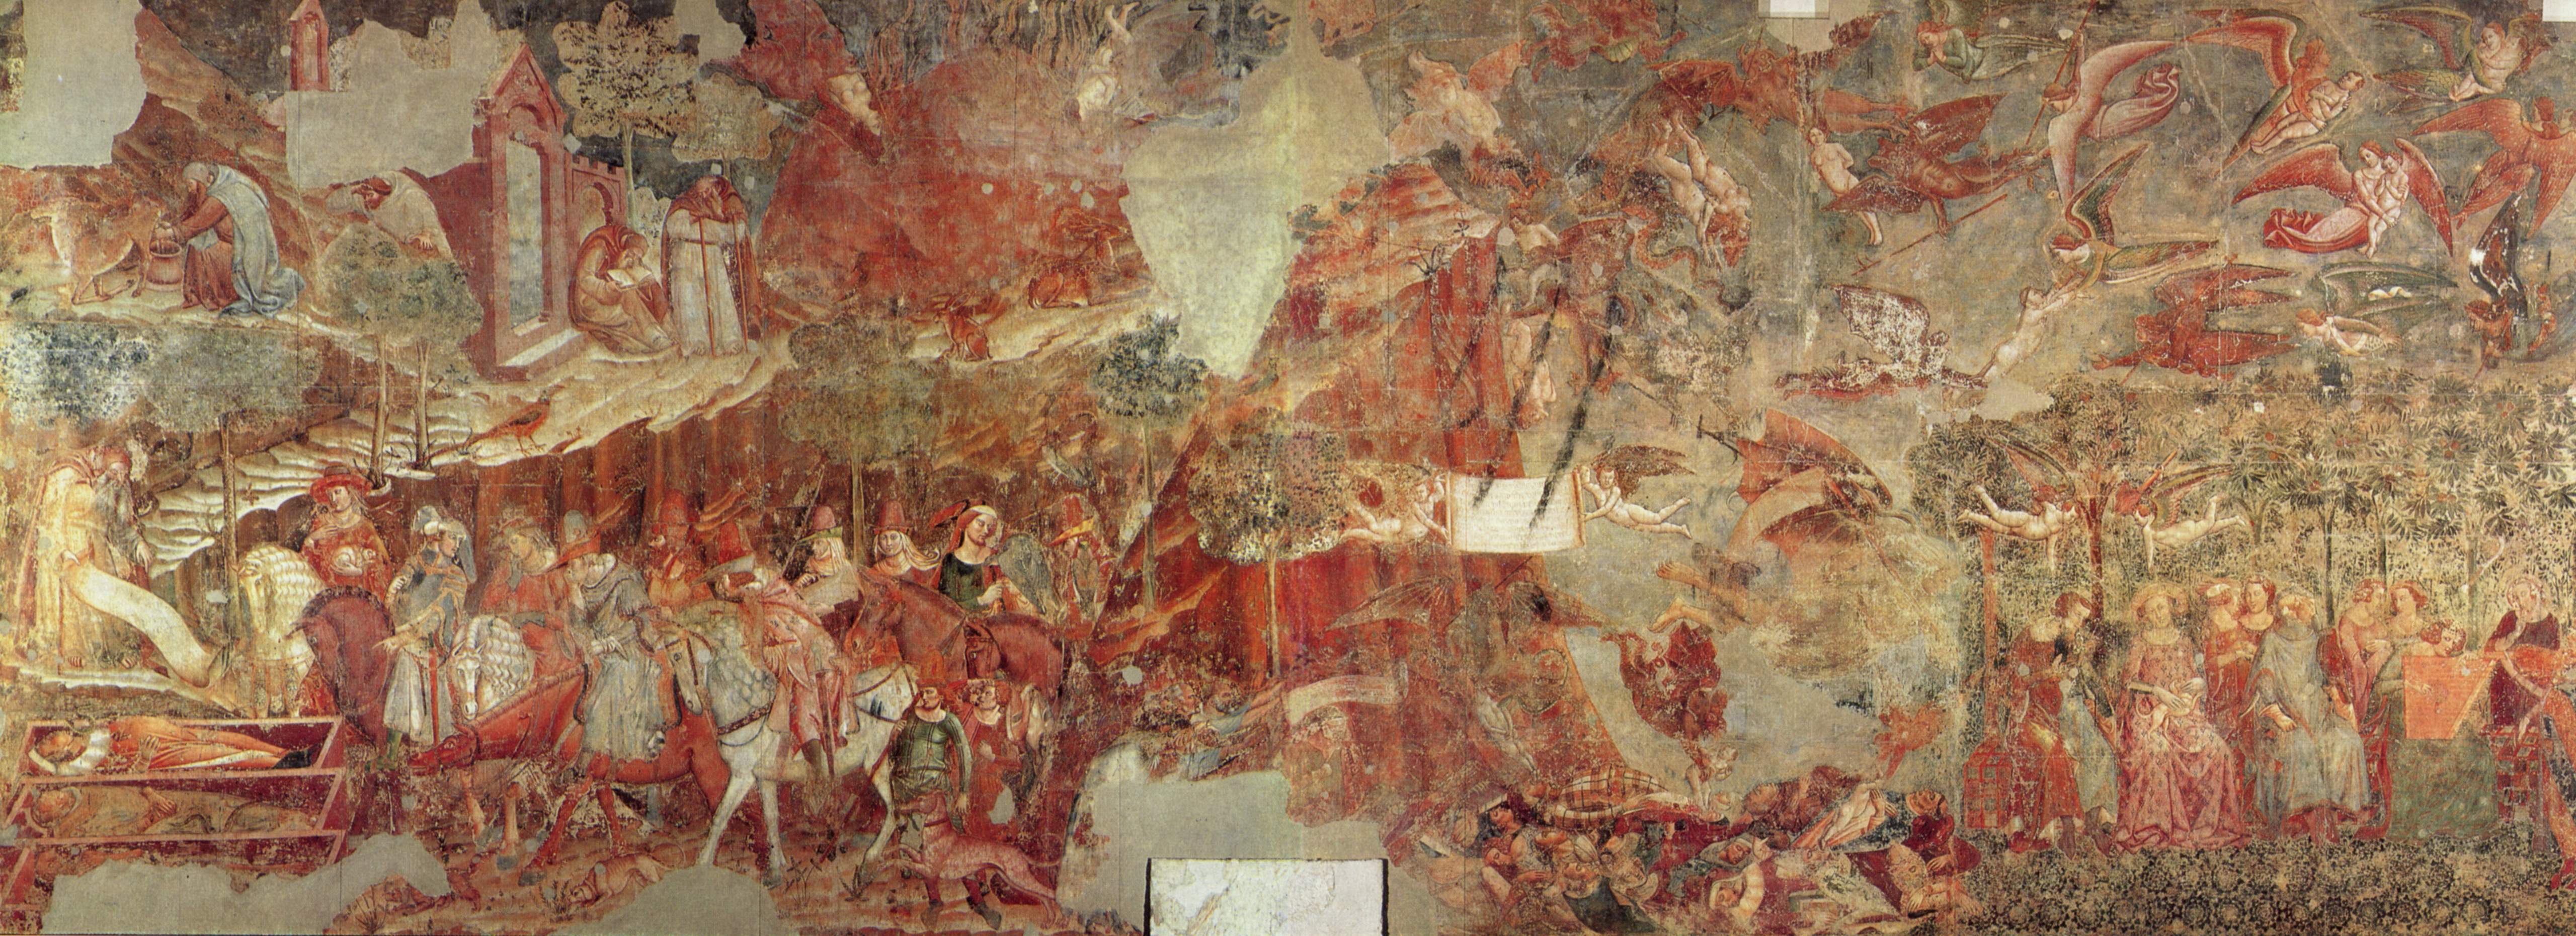 The Inferno, after the Fresco in the Camposanto of Pisa